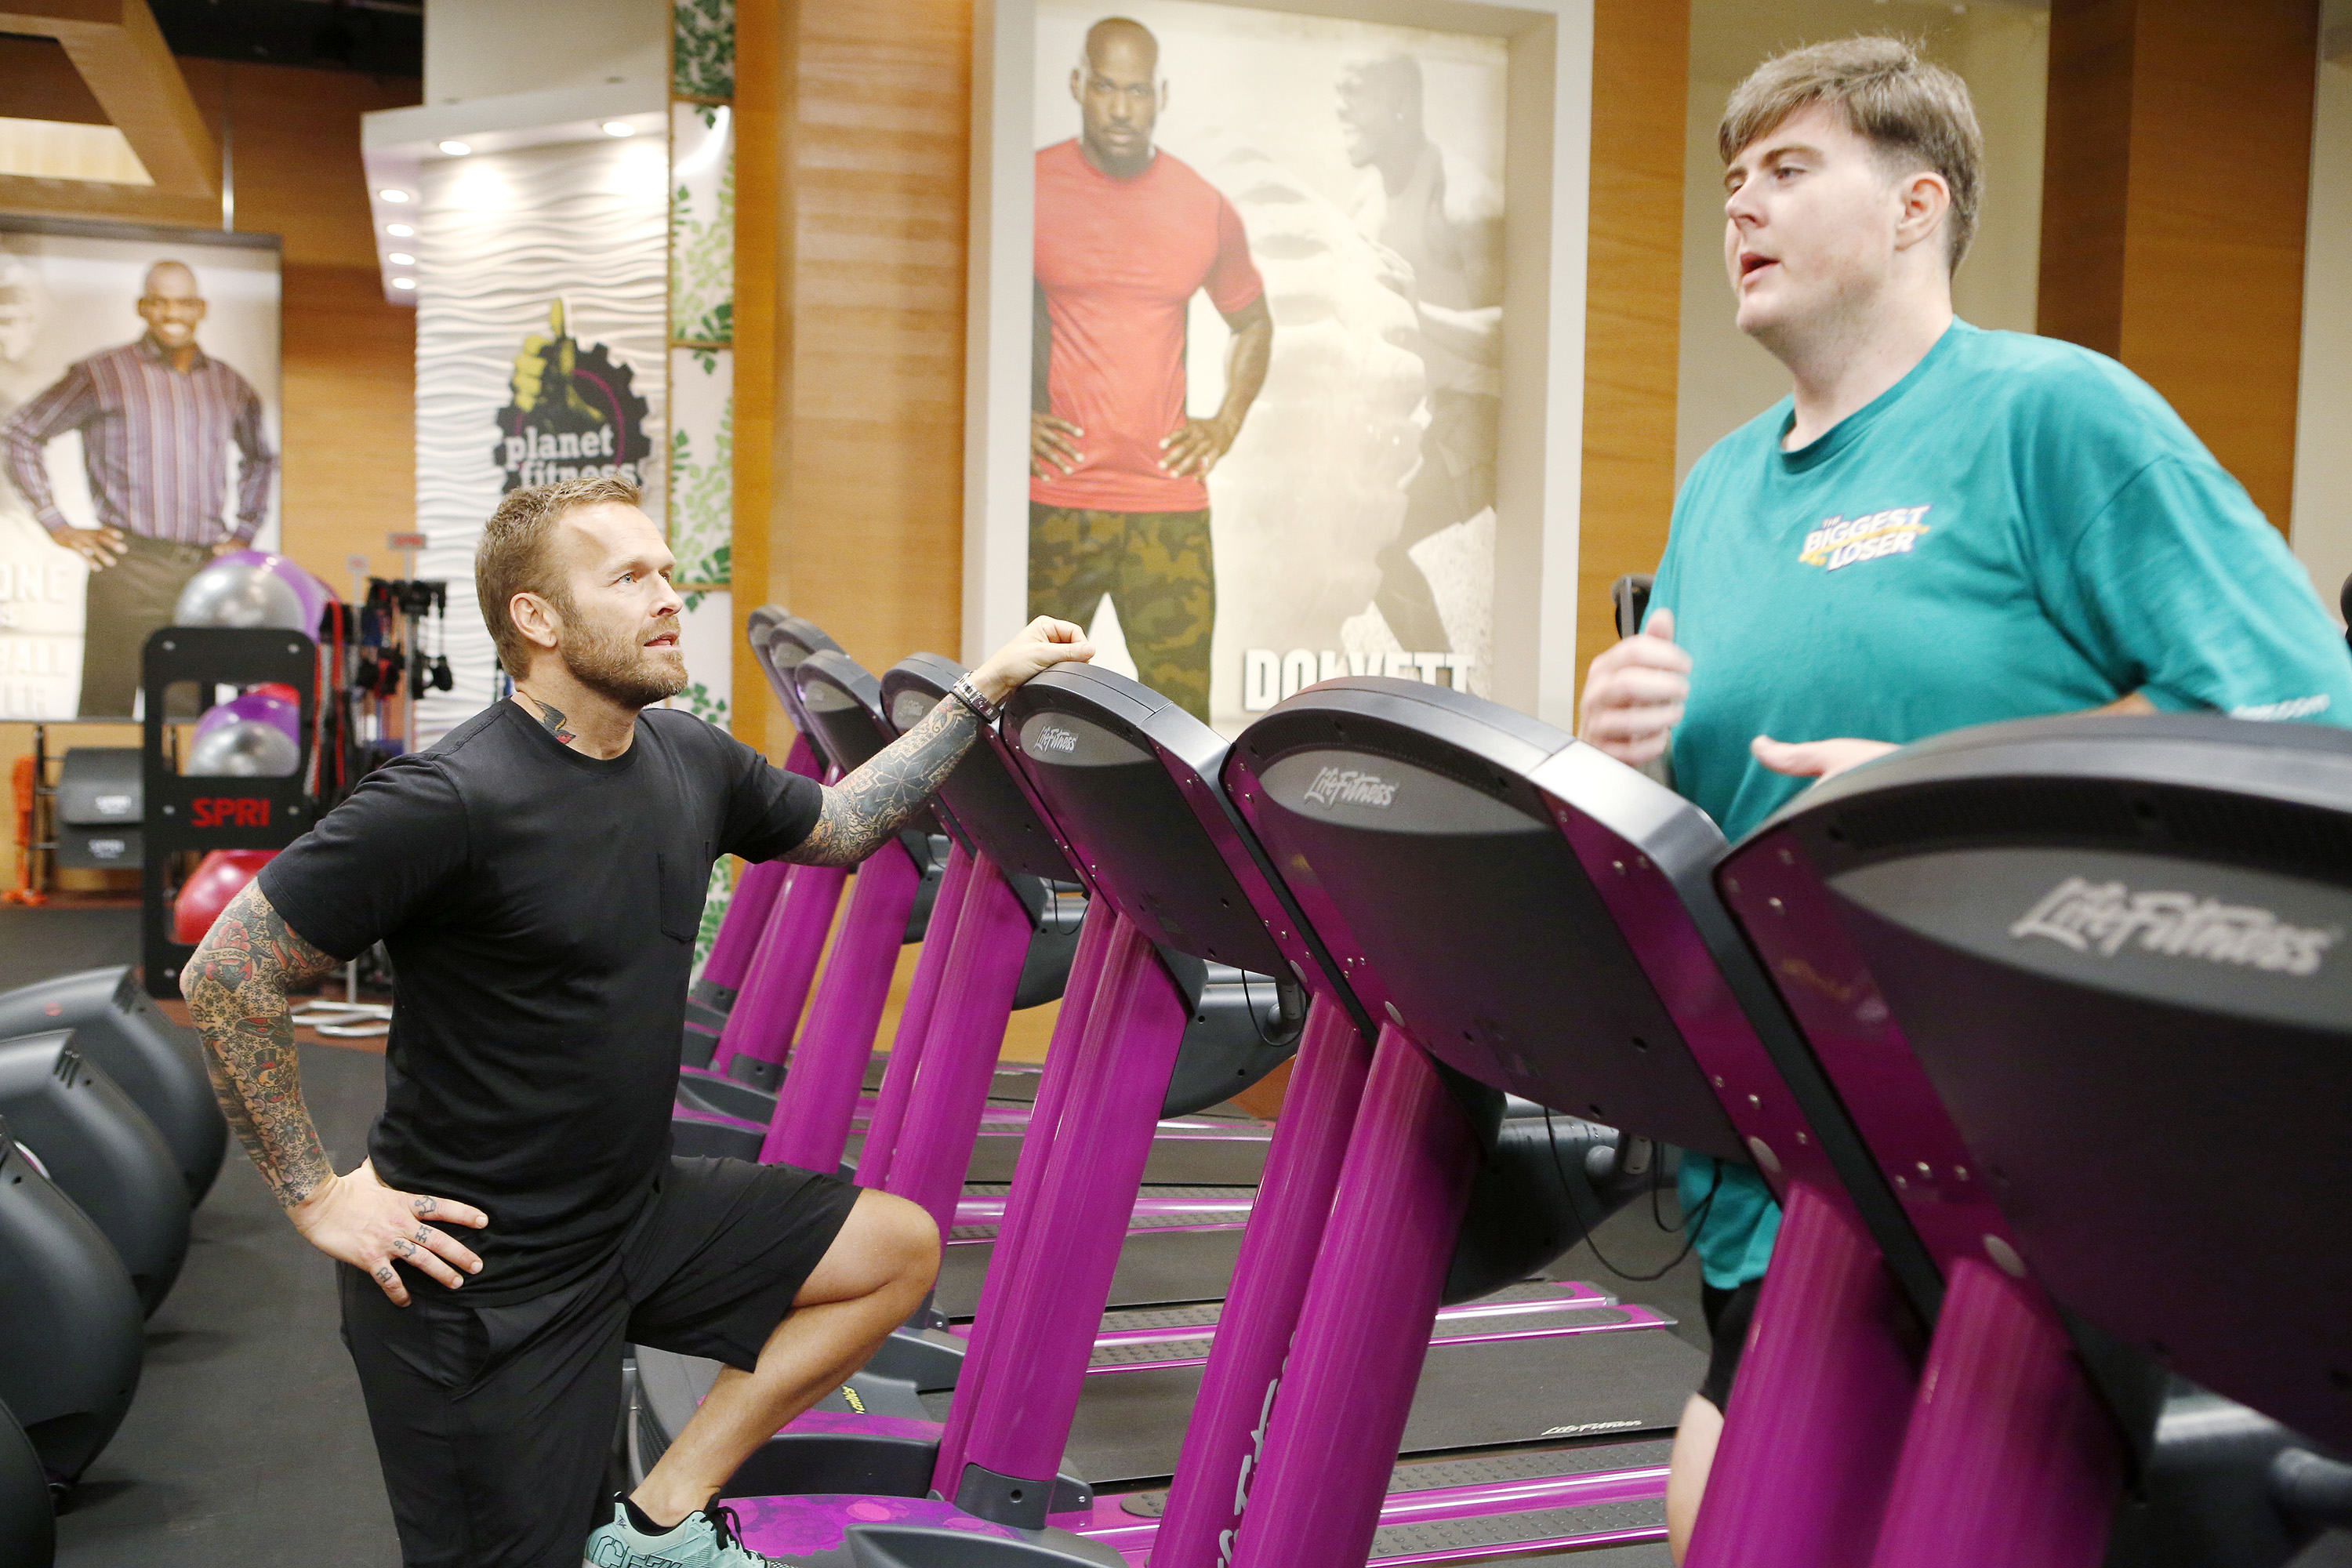 A contestant on the biggest loser running on a treadmill while a trainer watches